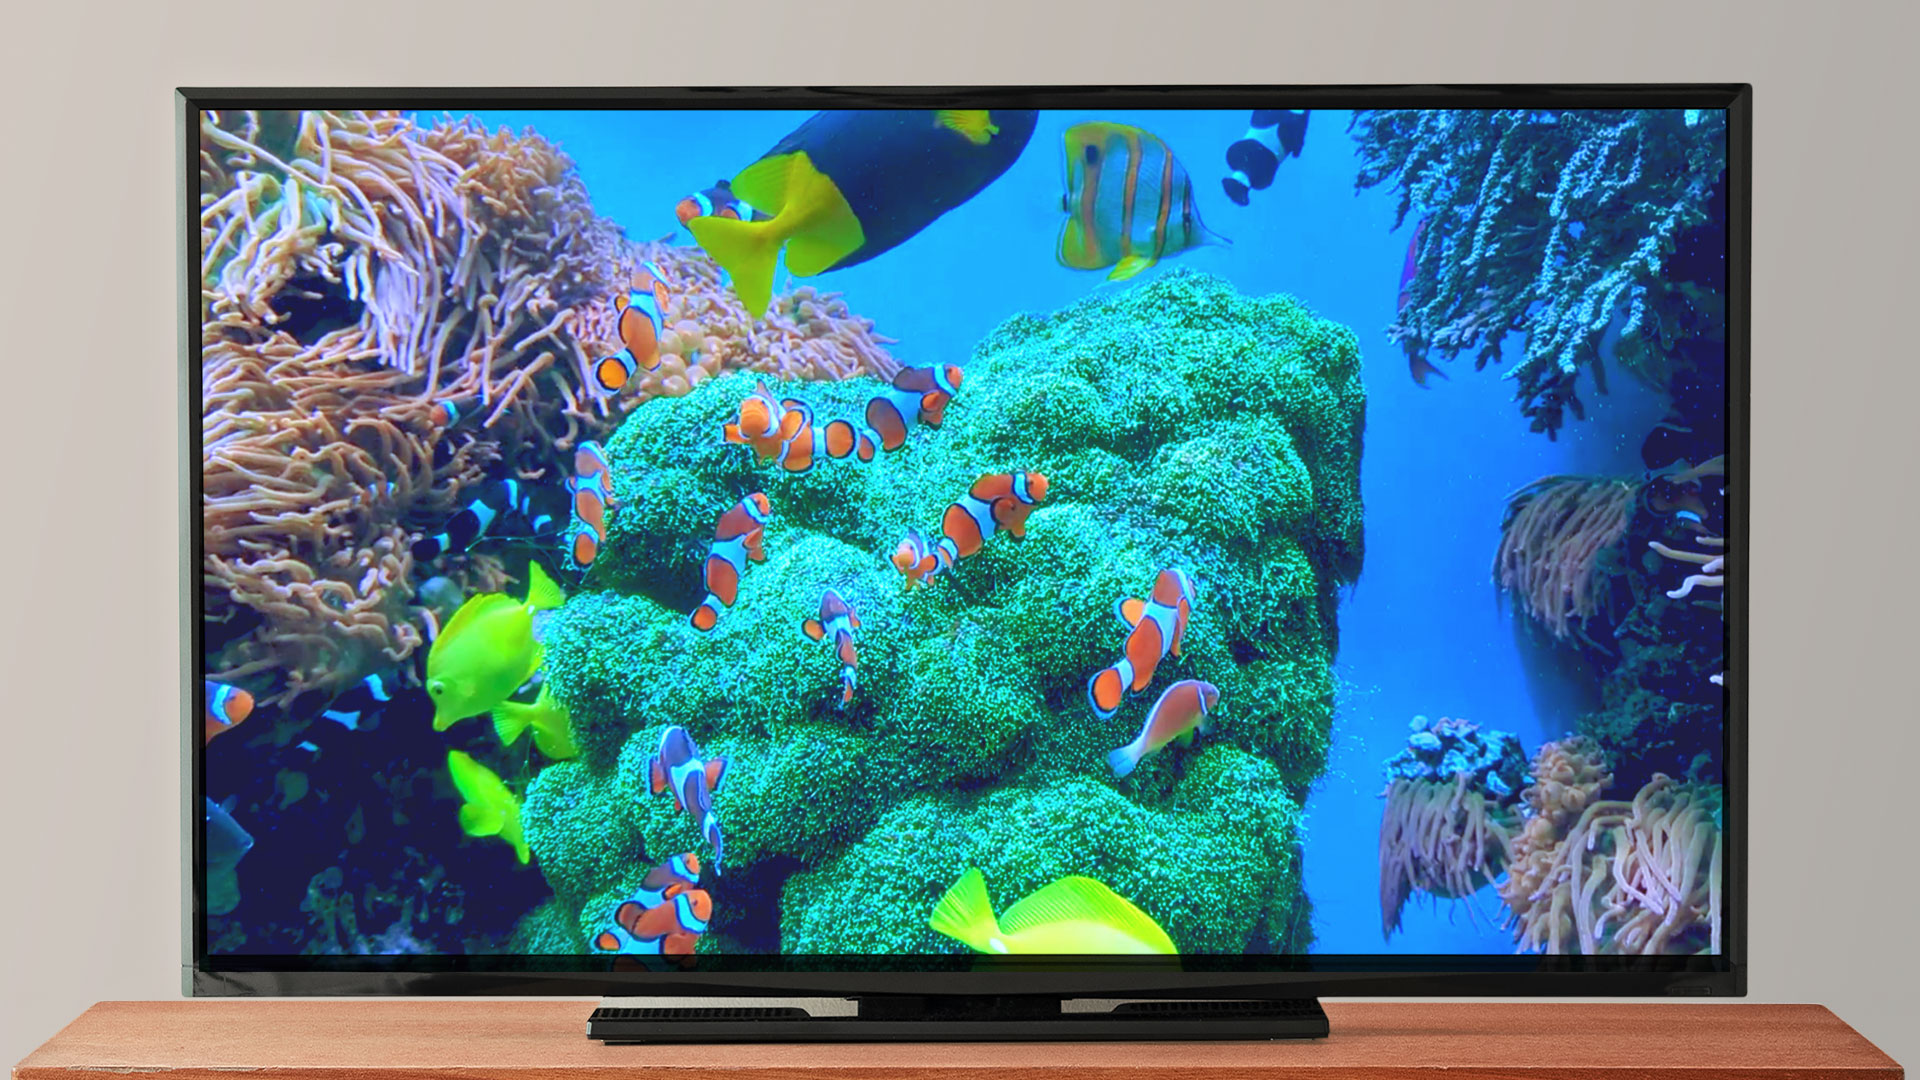 Amazing Aquariums In HD: Aquarium 4K VIDEO - Beautiful Coral Reef Fish - Relaxing Sleep Meditation Music Screensaver For Tablets And Fire TV - NO ADS